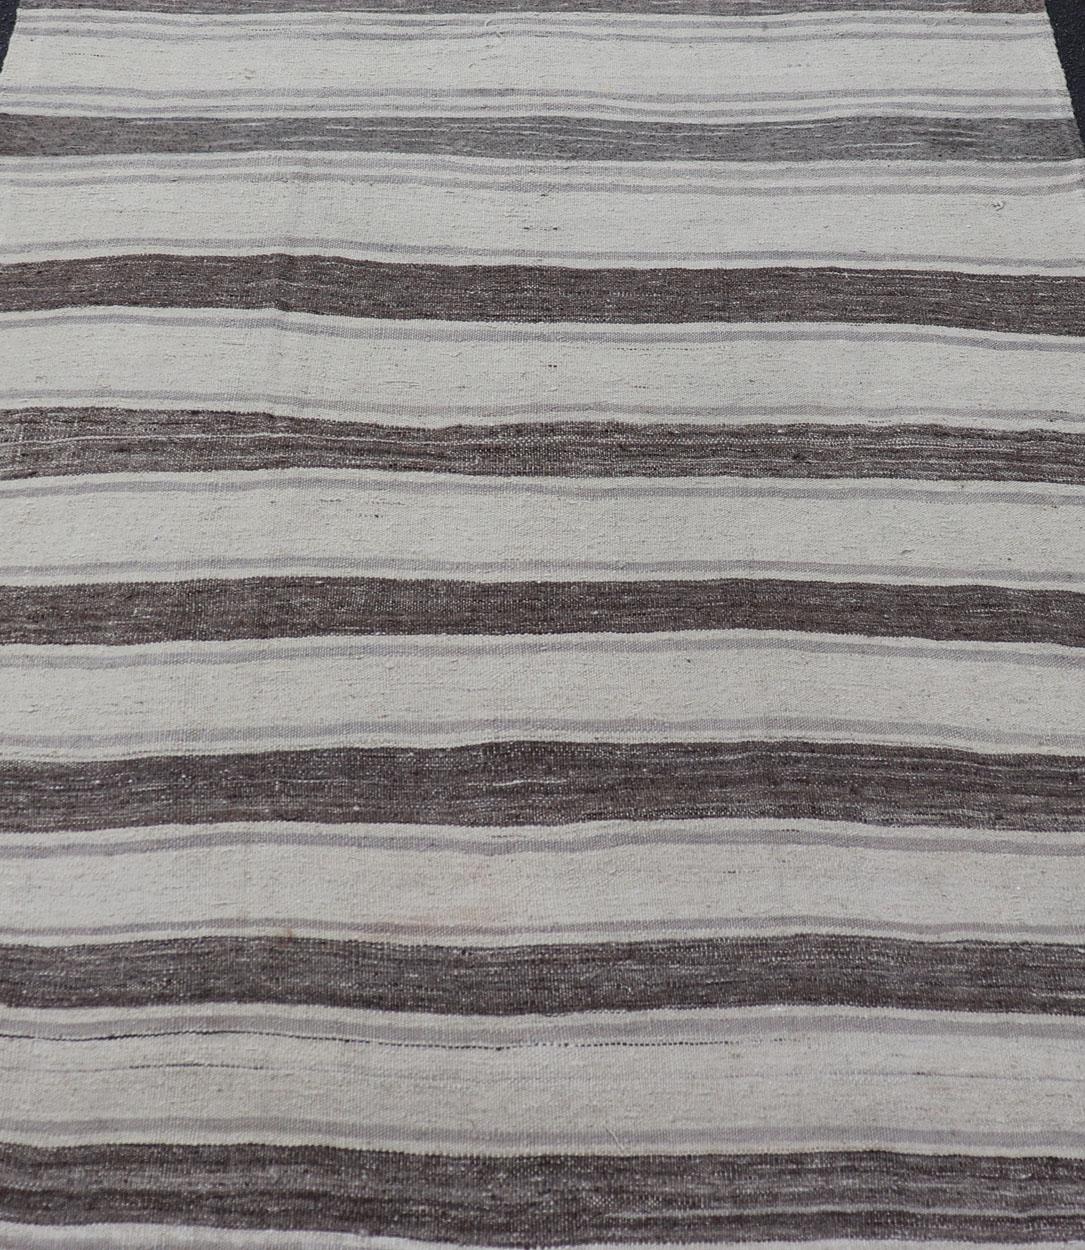 Hand-Woven Vintage Flat Weave Turkish Kilim with Stripes in Ivory, Grey, and Charcoal For Sale